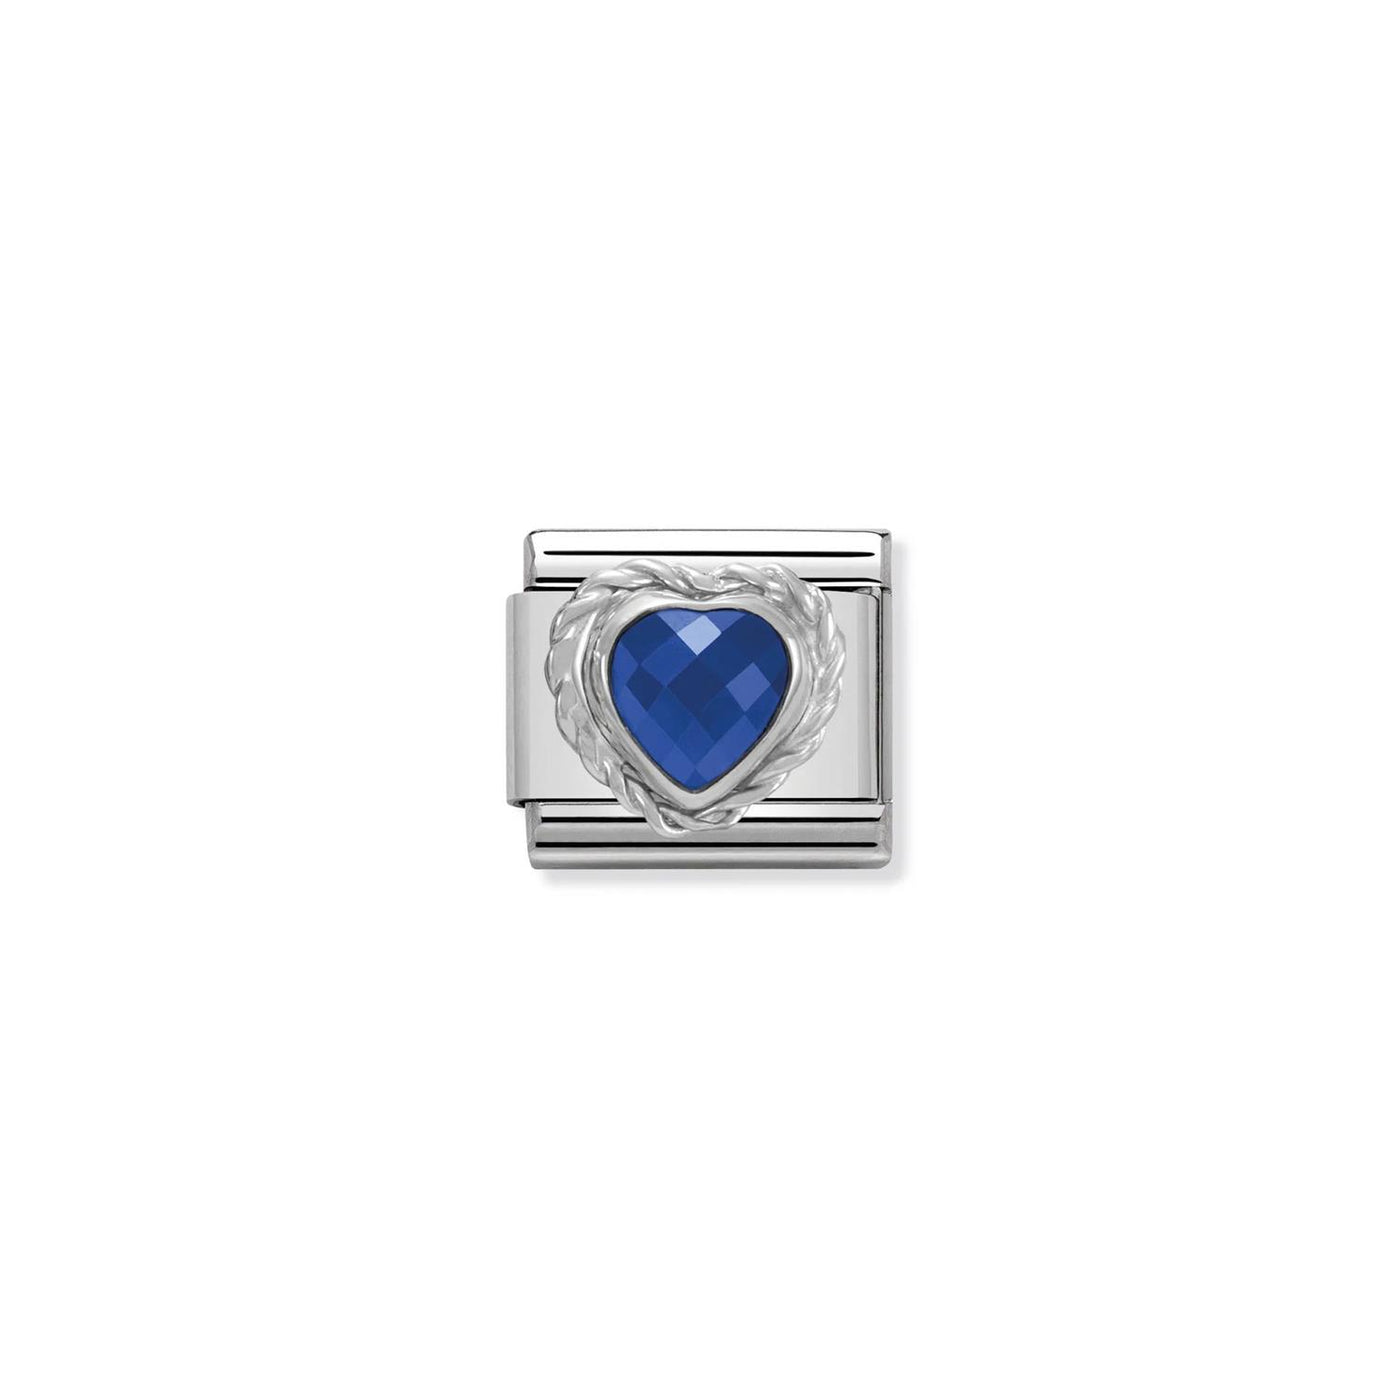 Heart Faceted CZ 925 sterling silver twisted setting and CZ blue